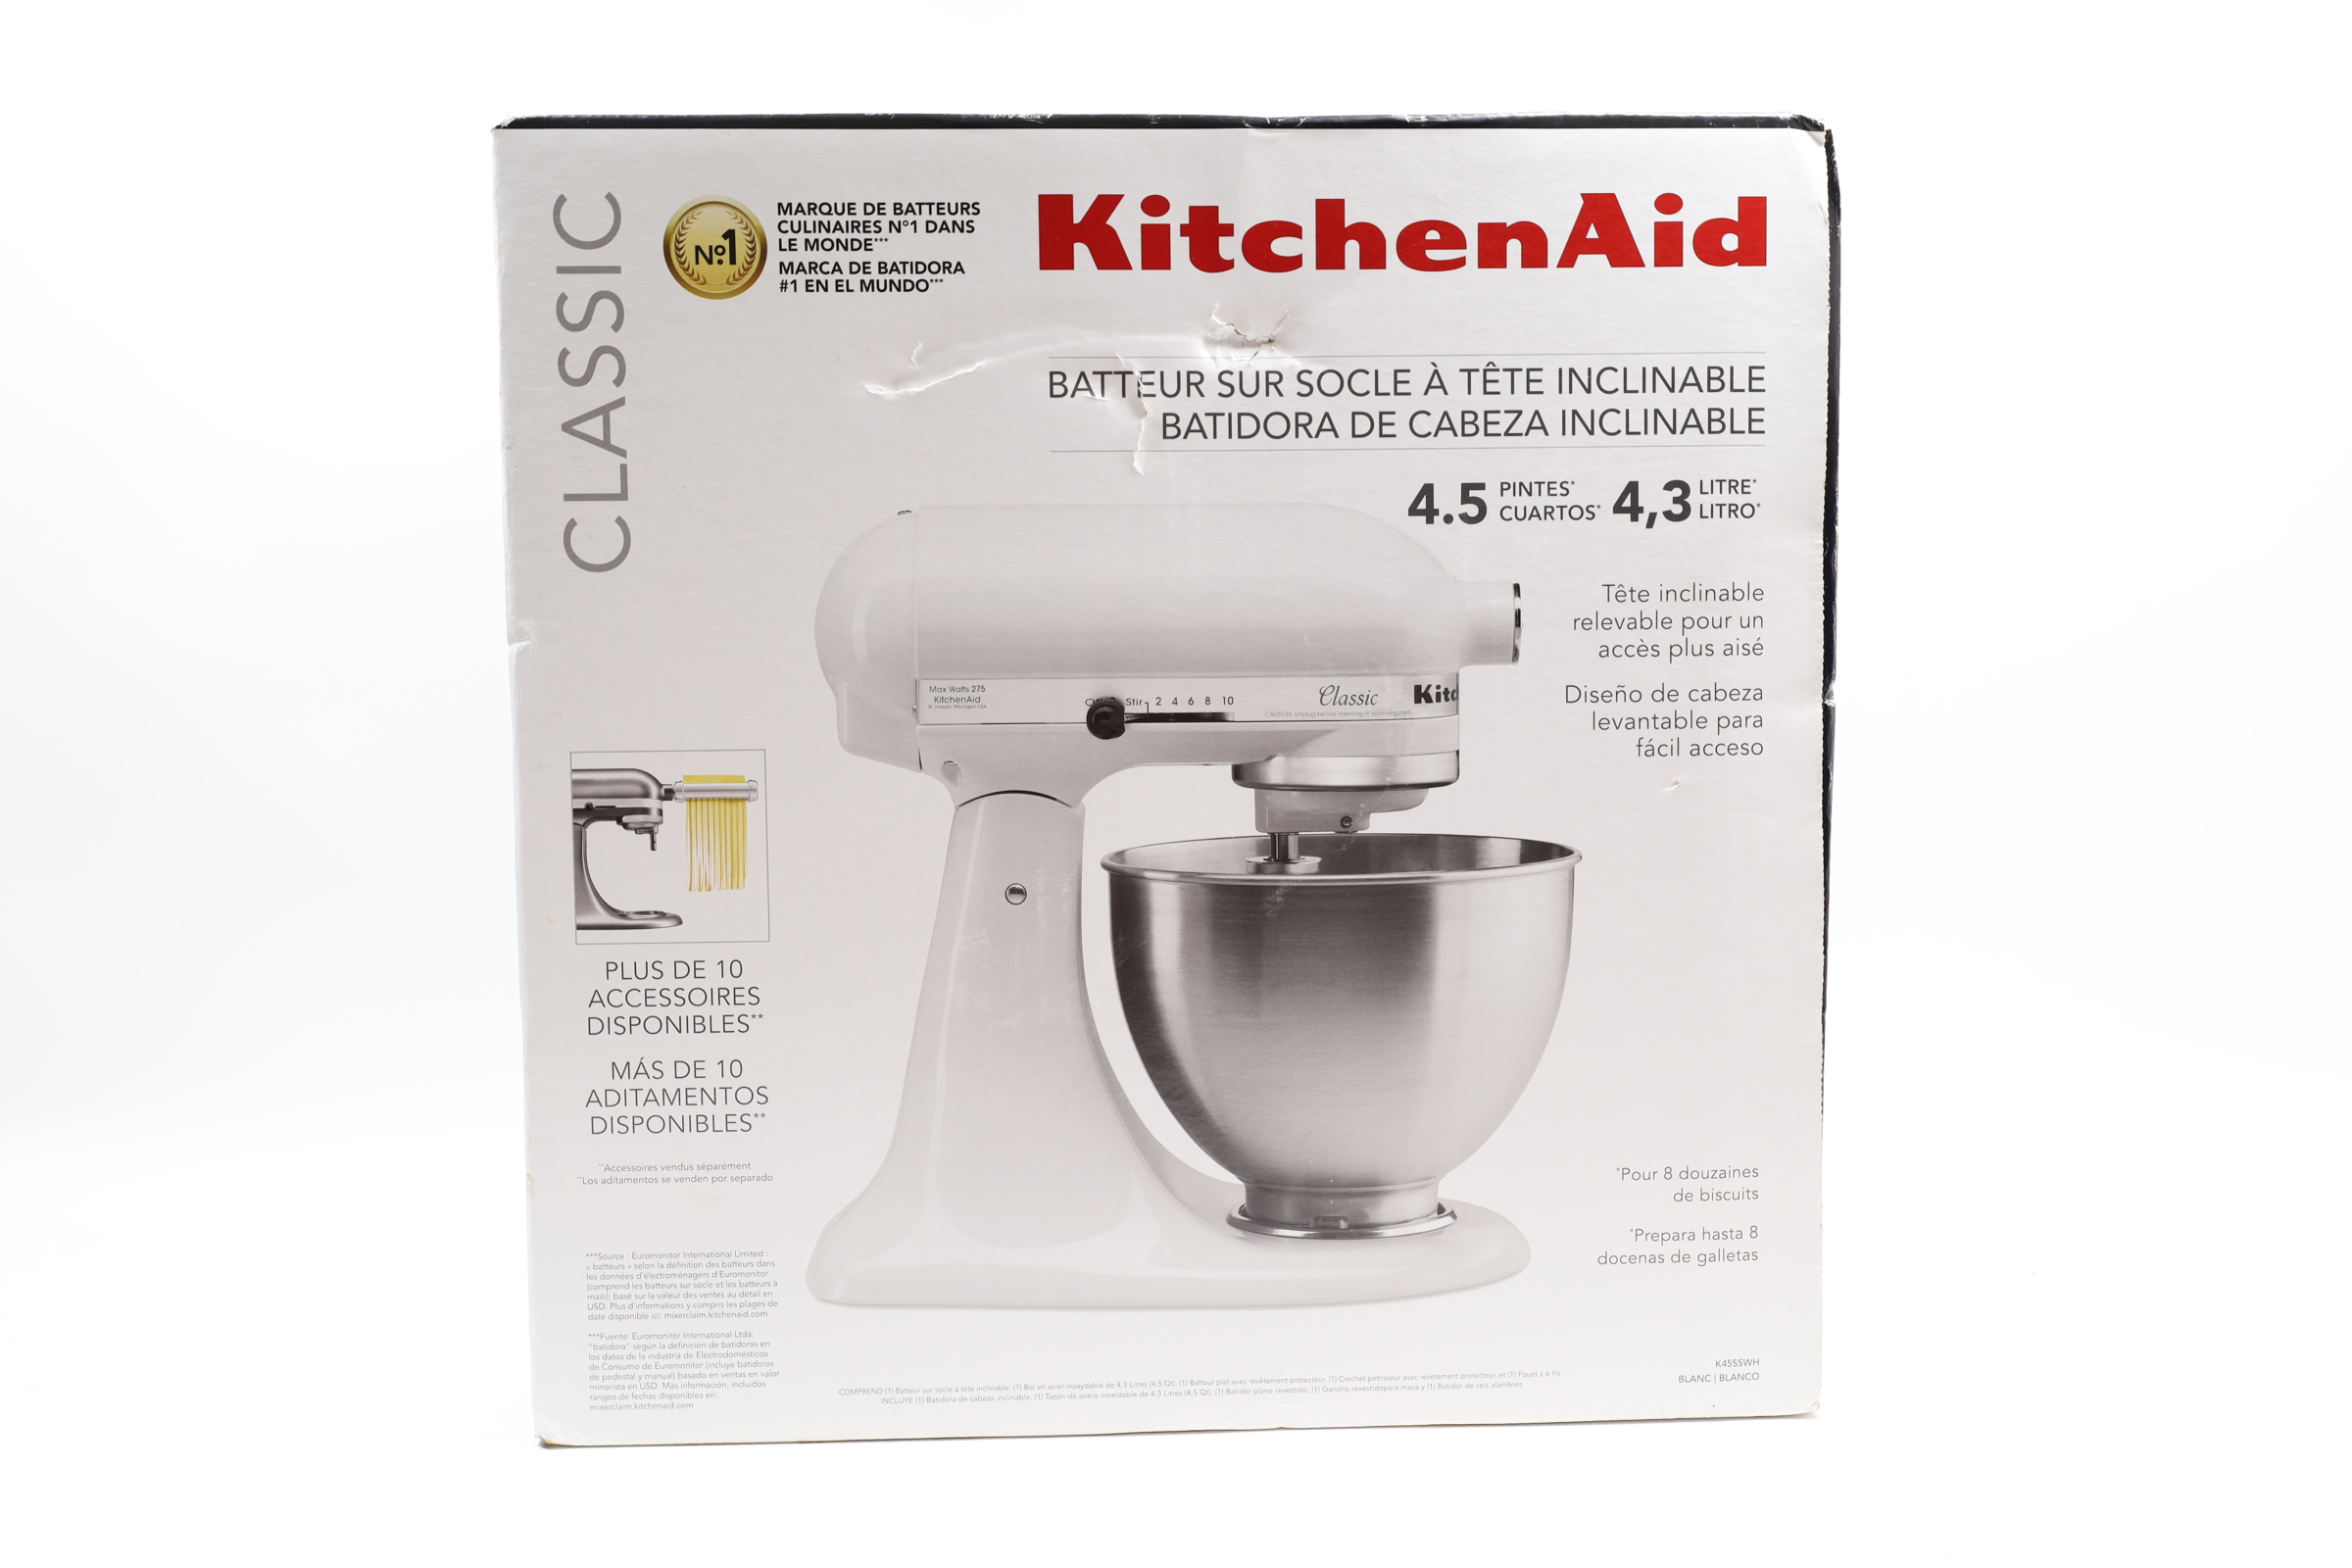 KitchenAid K45SSWH 10 Speed 4.5 Qt. Stand Mixer with